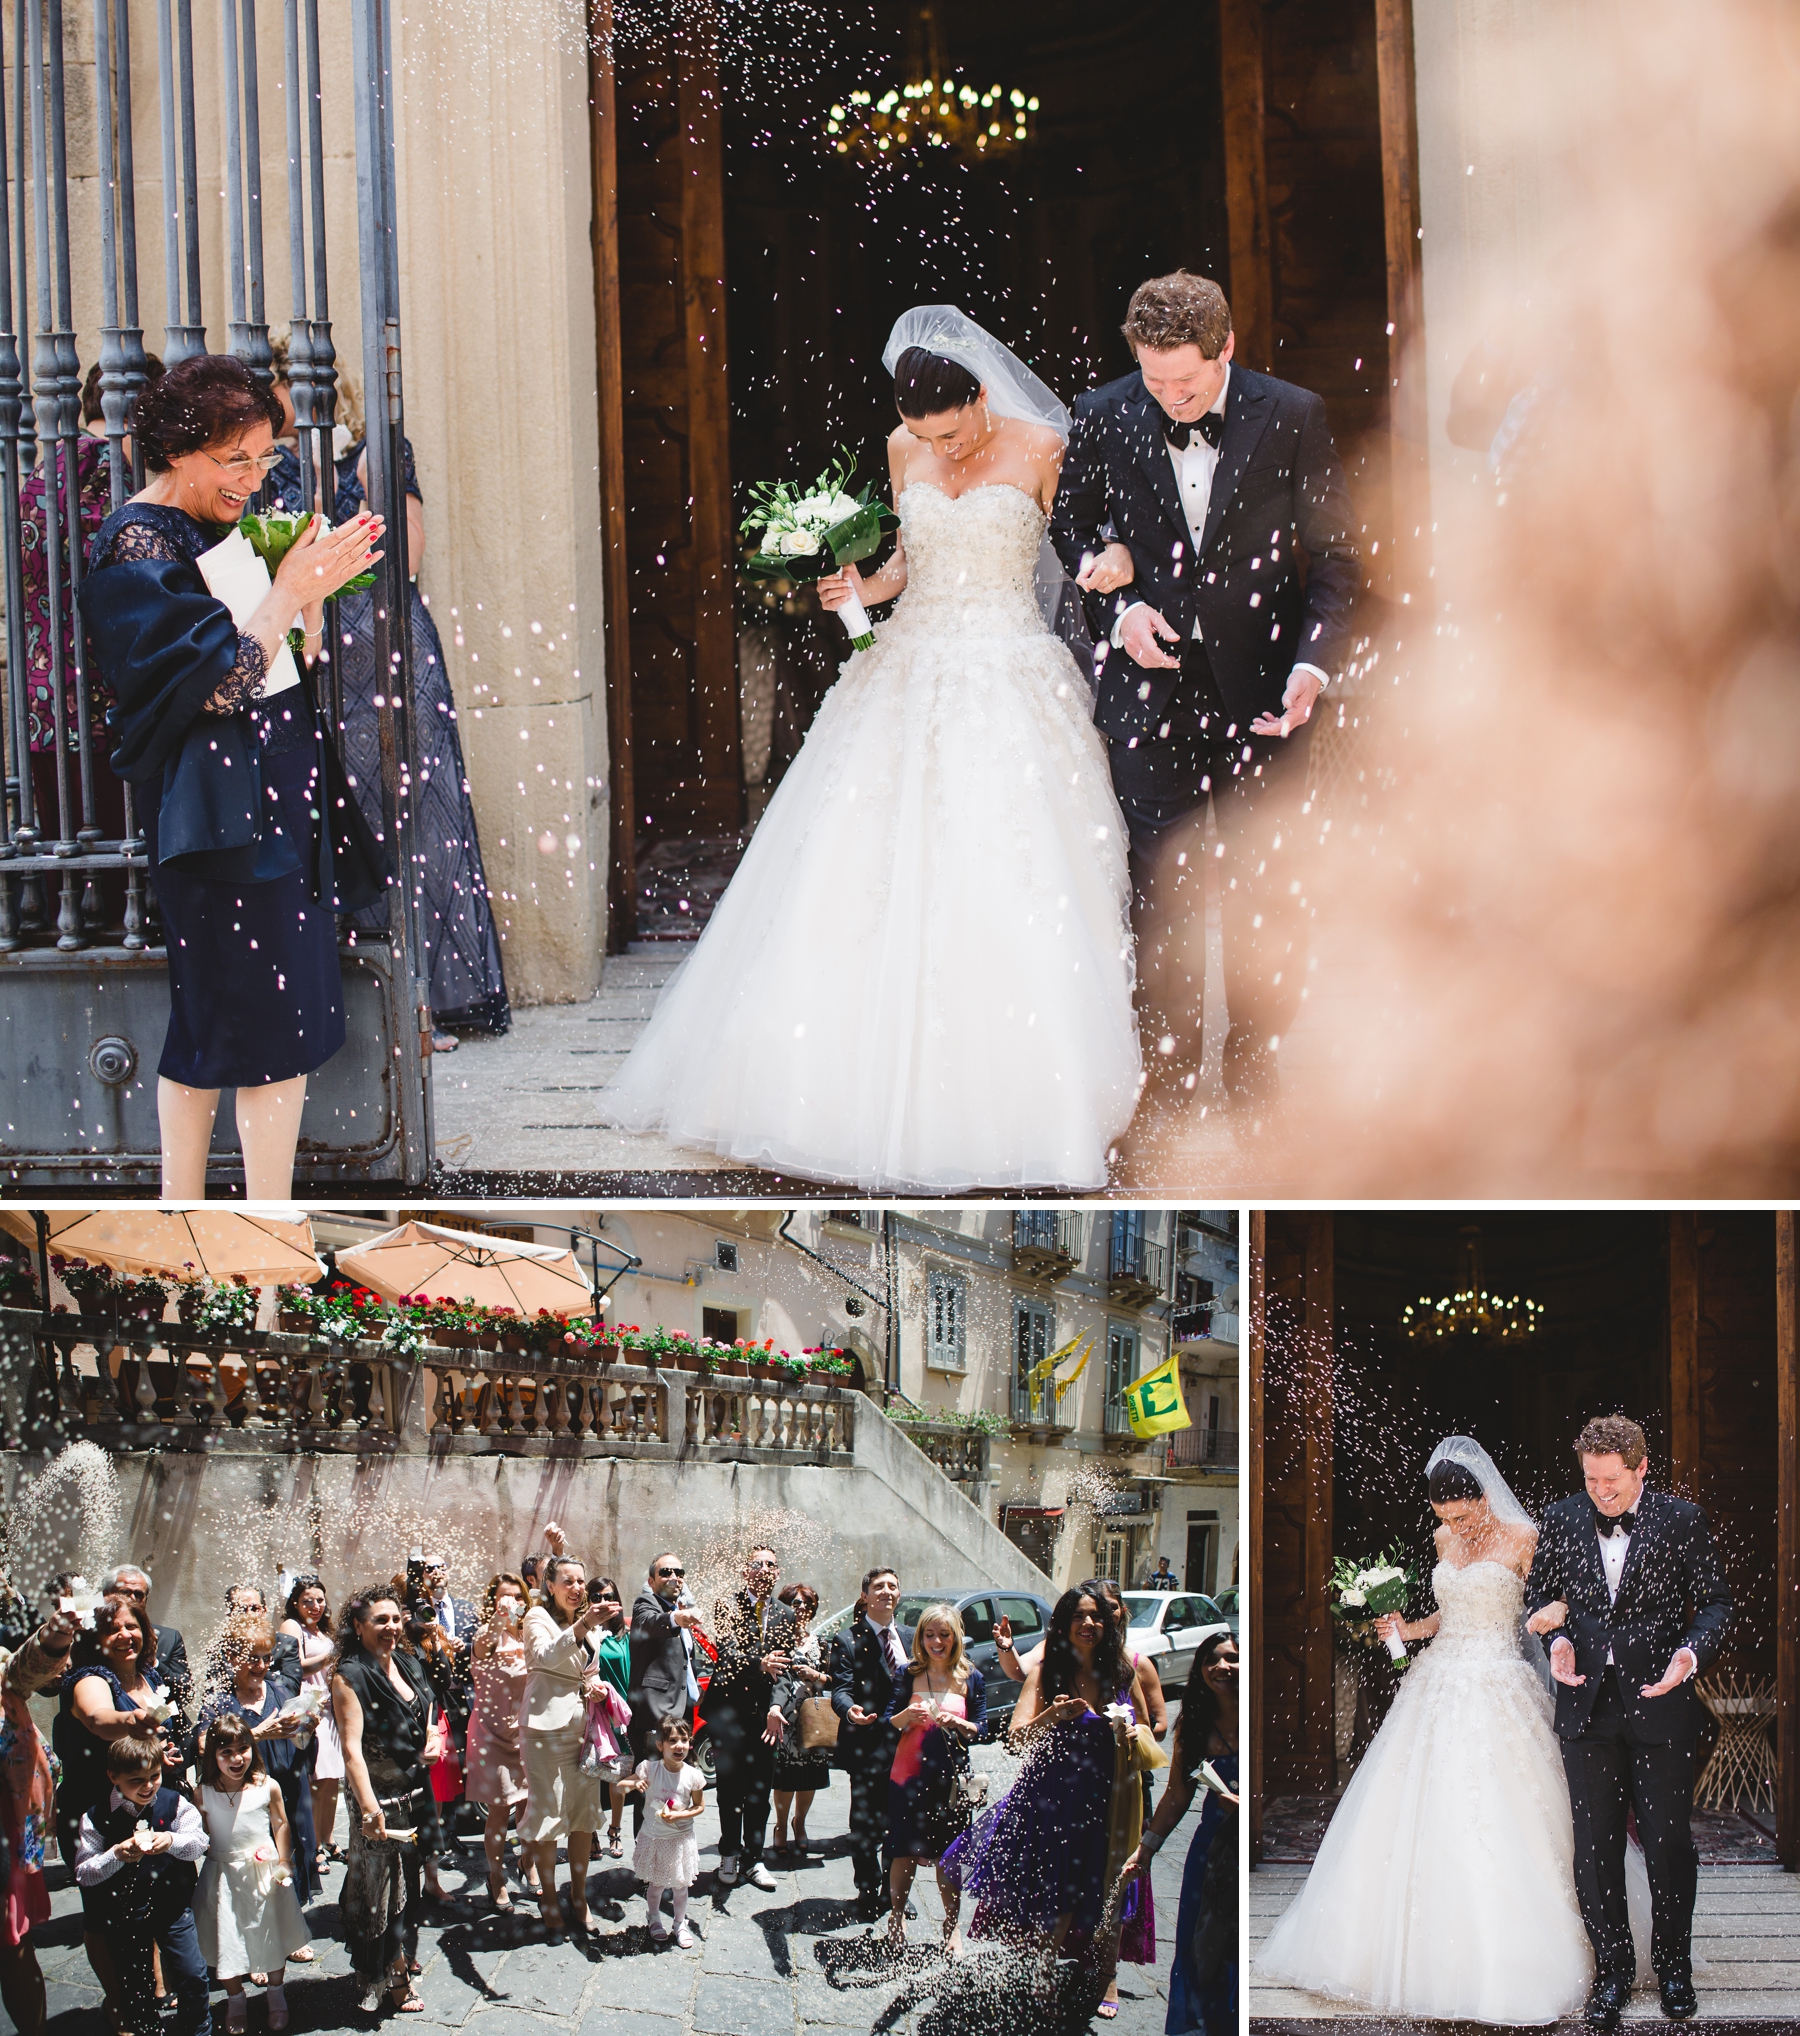 Ceremony Exit Photography – Cathedral ceremony exit – Izzy Hudgins Photography